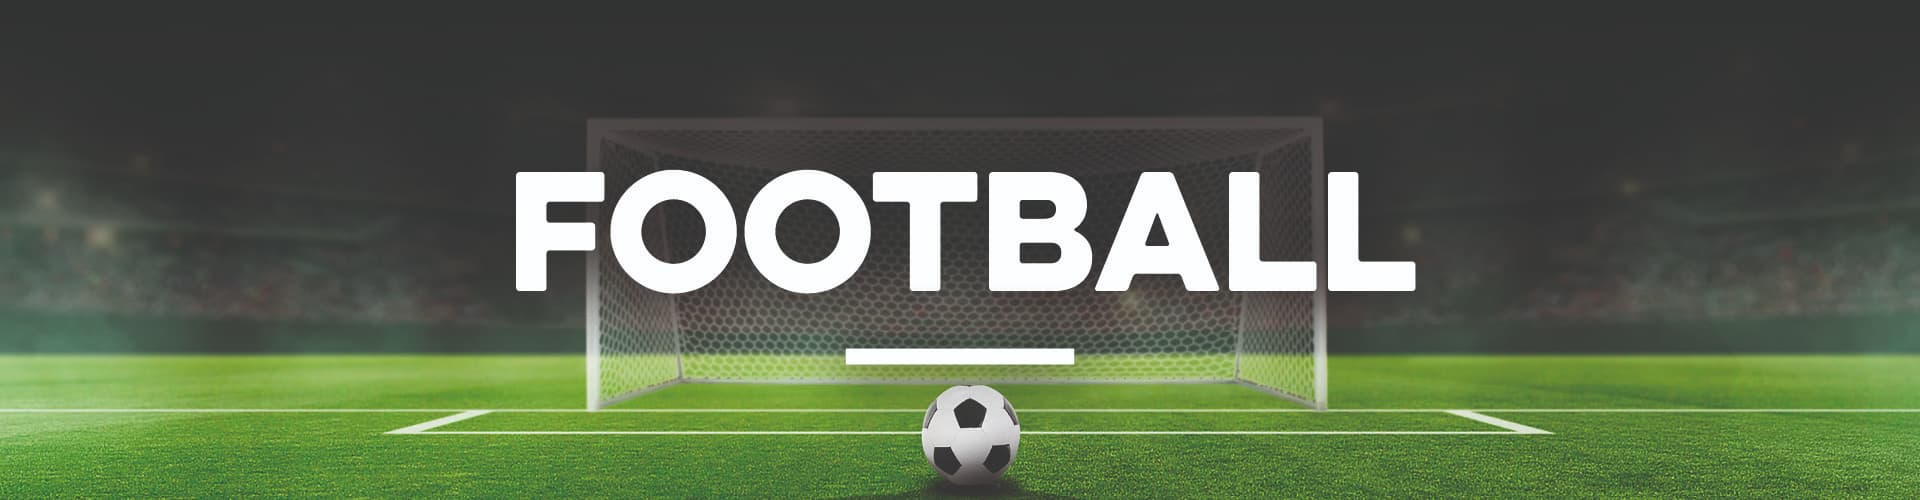 Watch Live Football in West Wickham at The Swan Pub